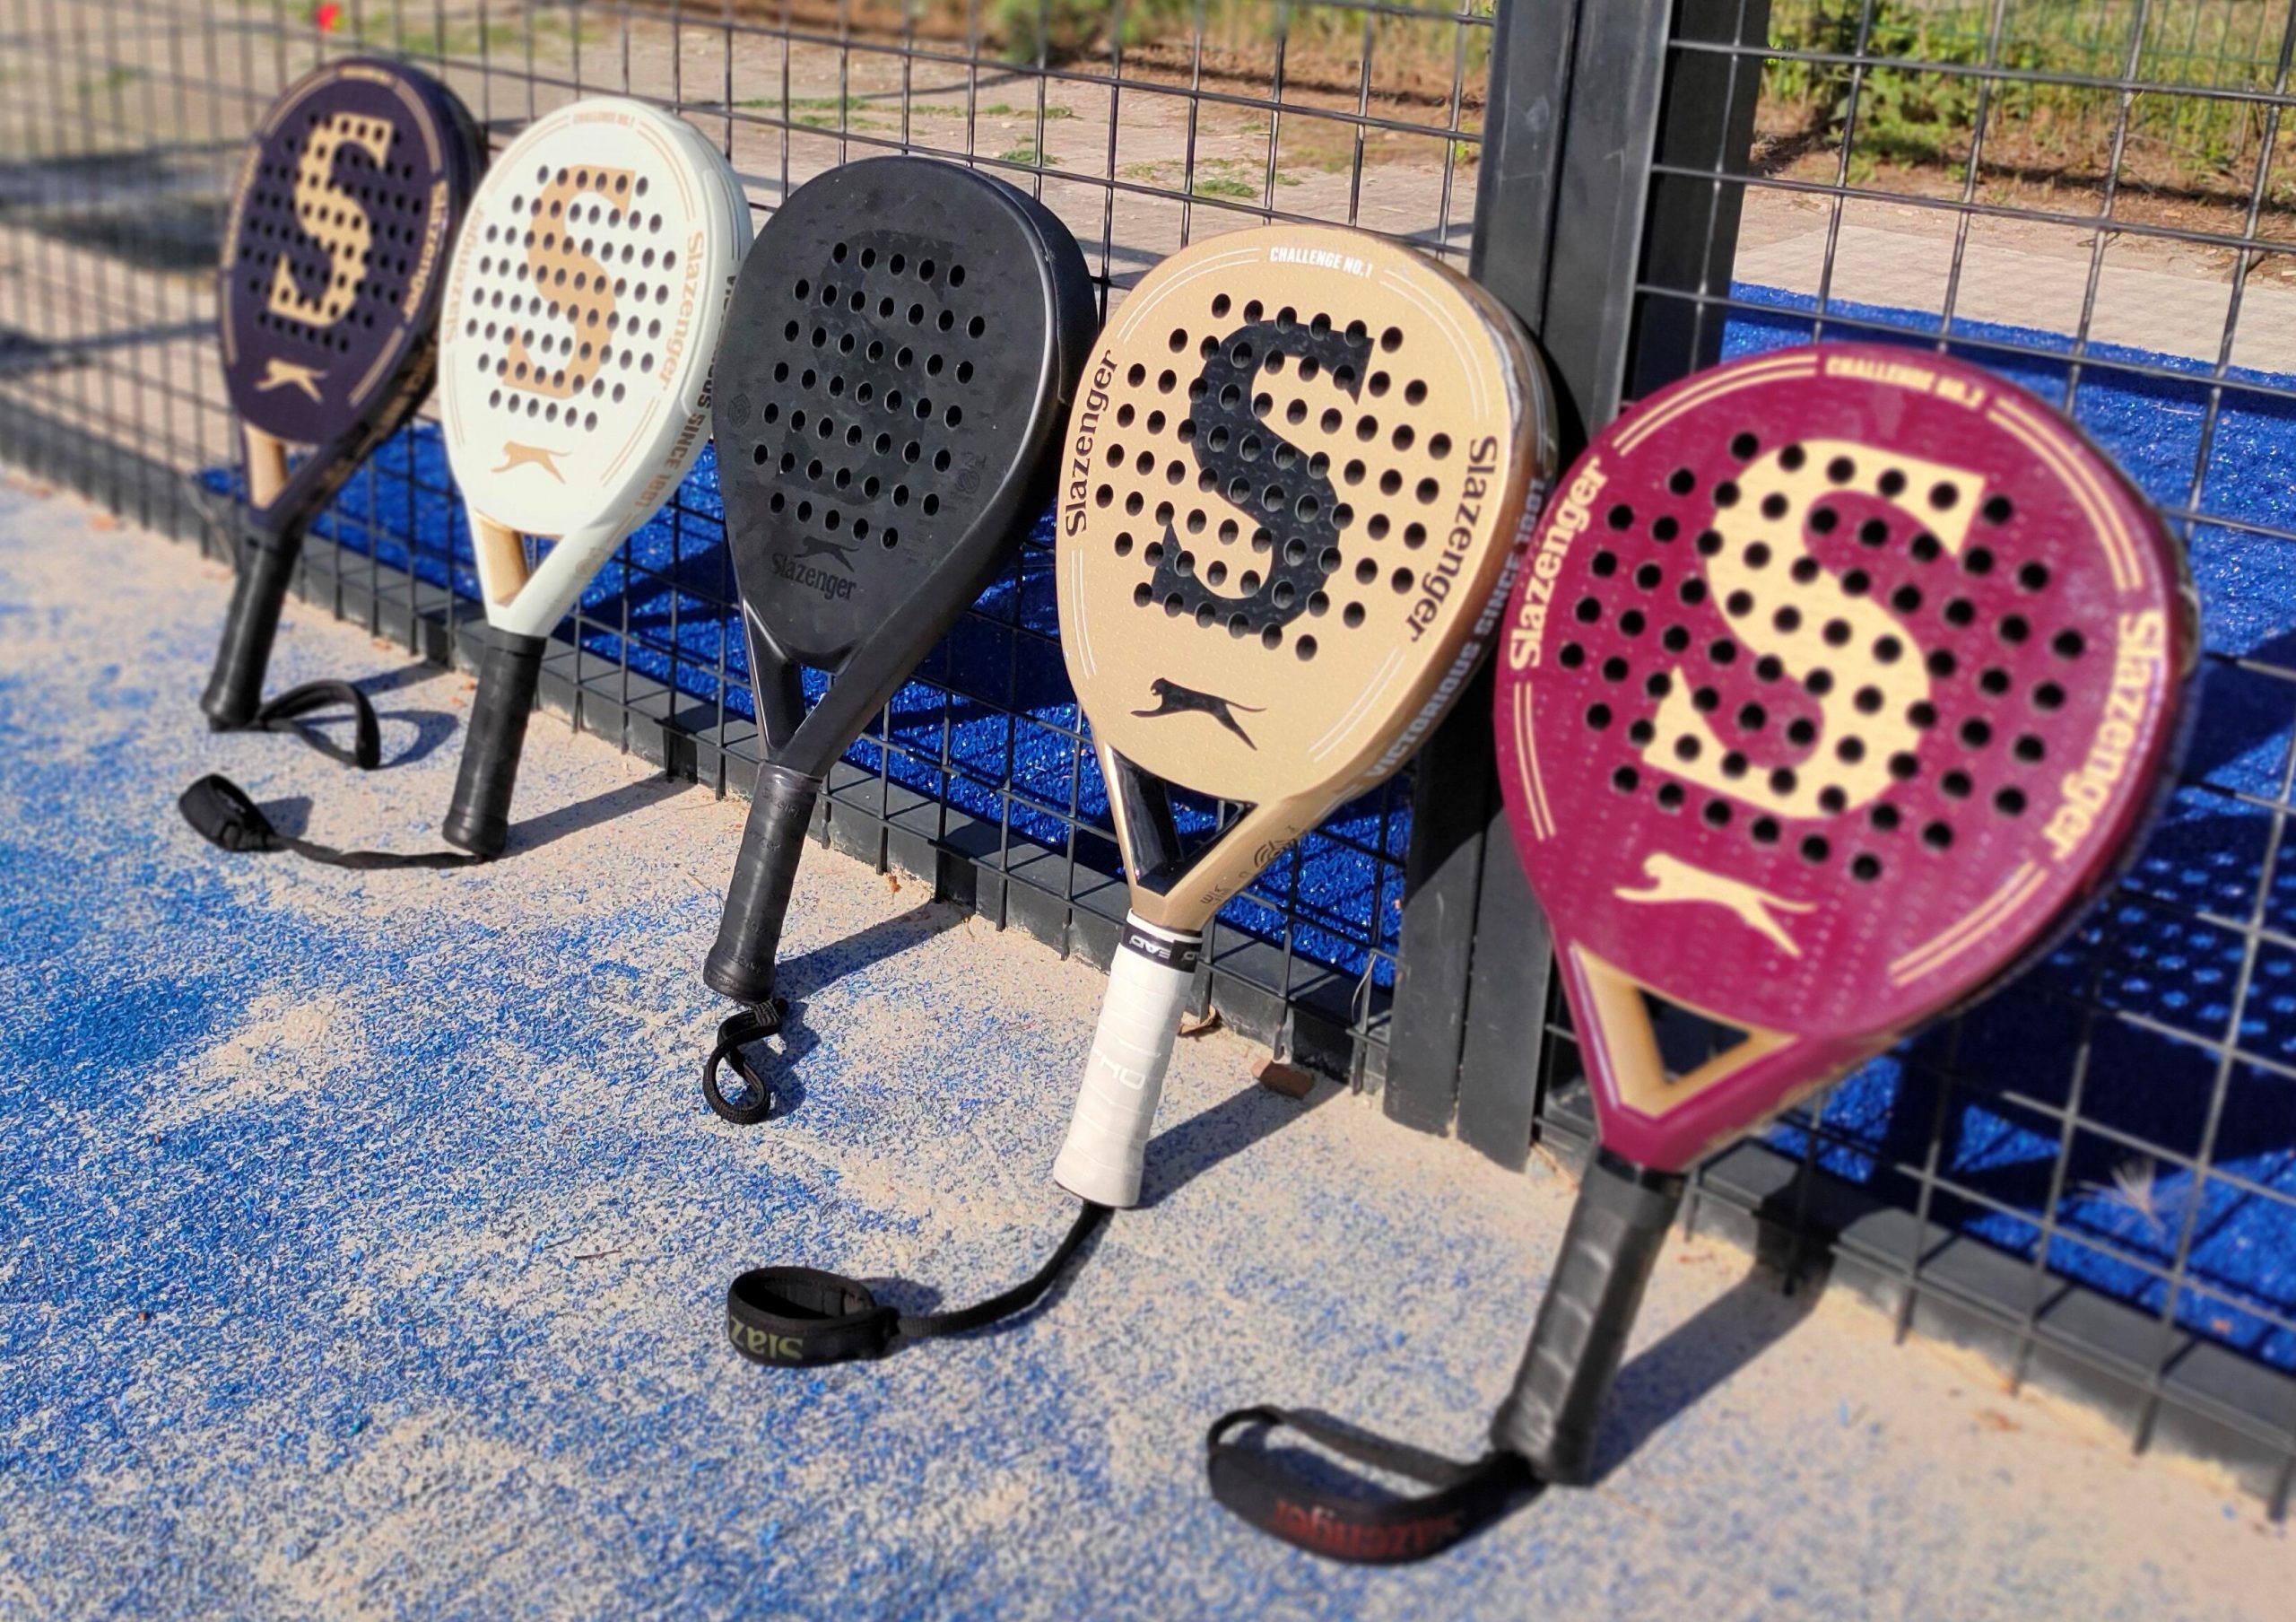 Slazenger padel : a return to the roots noticed!